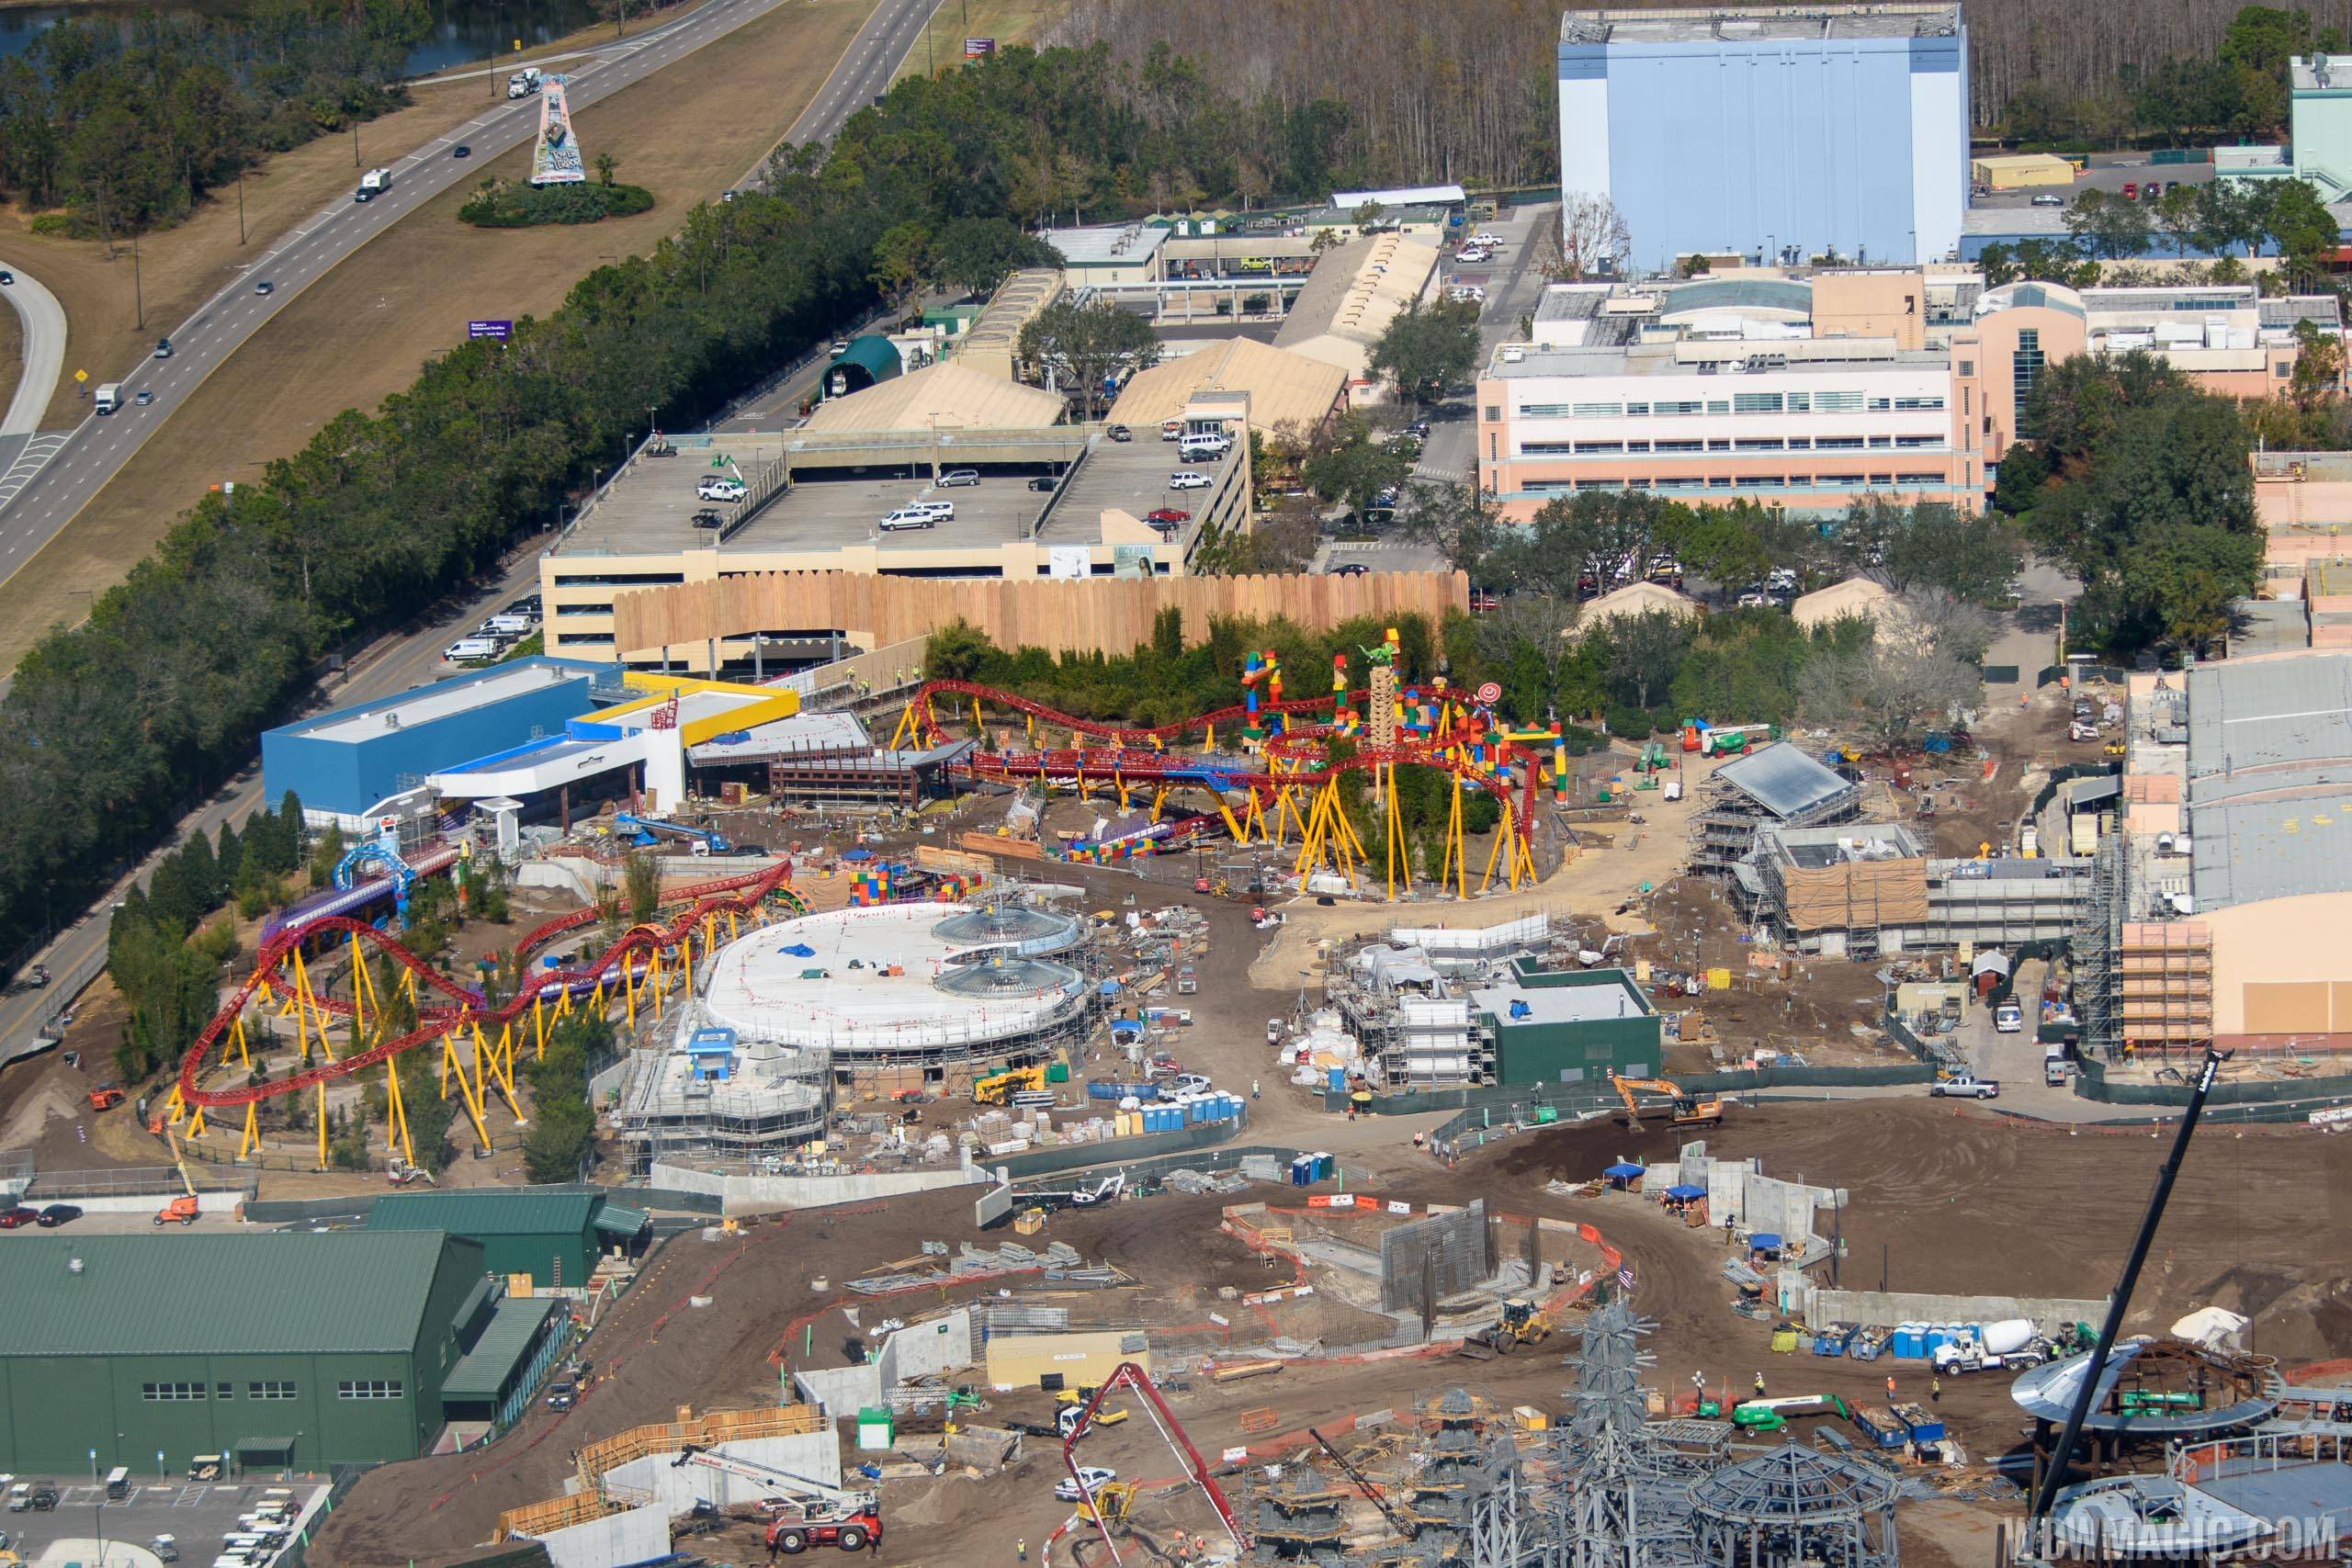 Wide view from the air of Toy Story Land